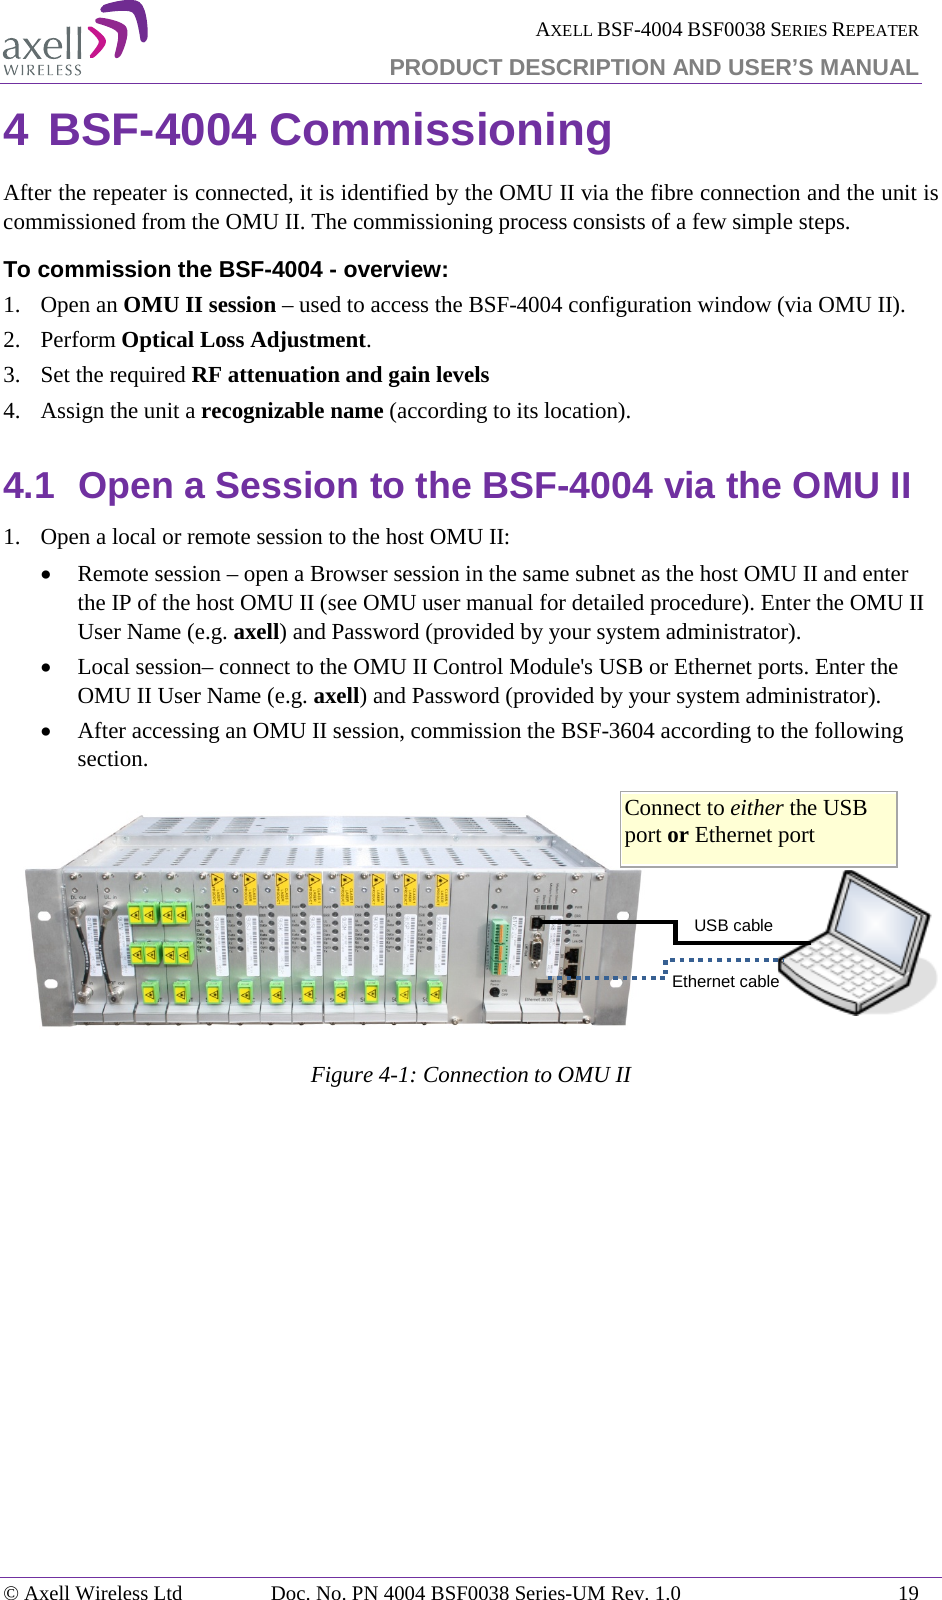  AXELL BSF-4004 BSF0038 SERIES REPEATER PRODUCT DESCRIPTION AND USER’S MANUAL  4 BSF-4004 Commissioning After the repeater is connected, it is identified by the OMU II via the fibre connection and the unit is commissioned from the OMU II. The commissioning process consists of a few simple steps. To commission the BSF-4004 - overview: 1.   Open an OMU II session – used to access the BSF-4004 configuration window (via OMU II). 2.  Perform Optical Loss Adjustment. 3.  Set the required RF attenuation and gain levels 4.  Assign the unit a recognizable name (according to its location). 4.1 Open a Session to the BSF-4004 via the OMU II 1.   Open a local or remote session to the host OMU II: • Remote session – open a Browser session in the same subnet as the host OMU II and enter the IP of the host OMU II (see OMU user manual for detailed procedure). Enter the OMU II User Name (e.g. axell) and Password (provided by your system administrator). • Local session– connect to the OMU II Control Module&apos;s USB or Ethernet ports. Enter the OMU II User Name (e.g. axell) and Password (provided by your system administrator). • After accessing an OMU II session, commission the BSF-3604 according to the following section.           Figure  4-1: Connection to OMU II   USB cable Ethernet cable Connect to either the USB port or Ethernet port © Axell Wireless Ltd Doc. No. PN 4004 BSF0038 Series-UM Rev. 1.0 19 